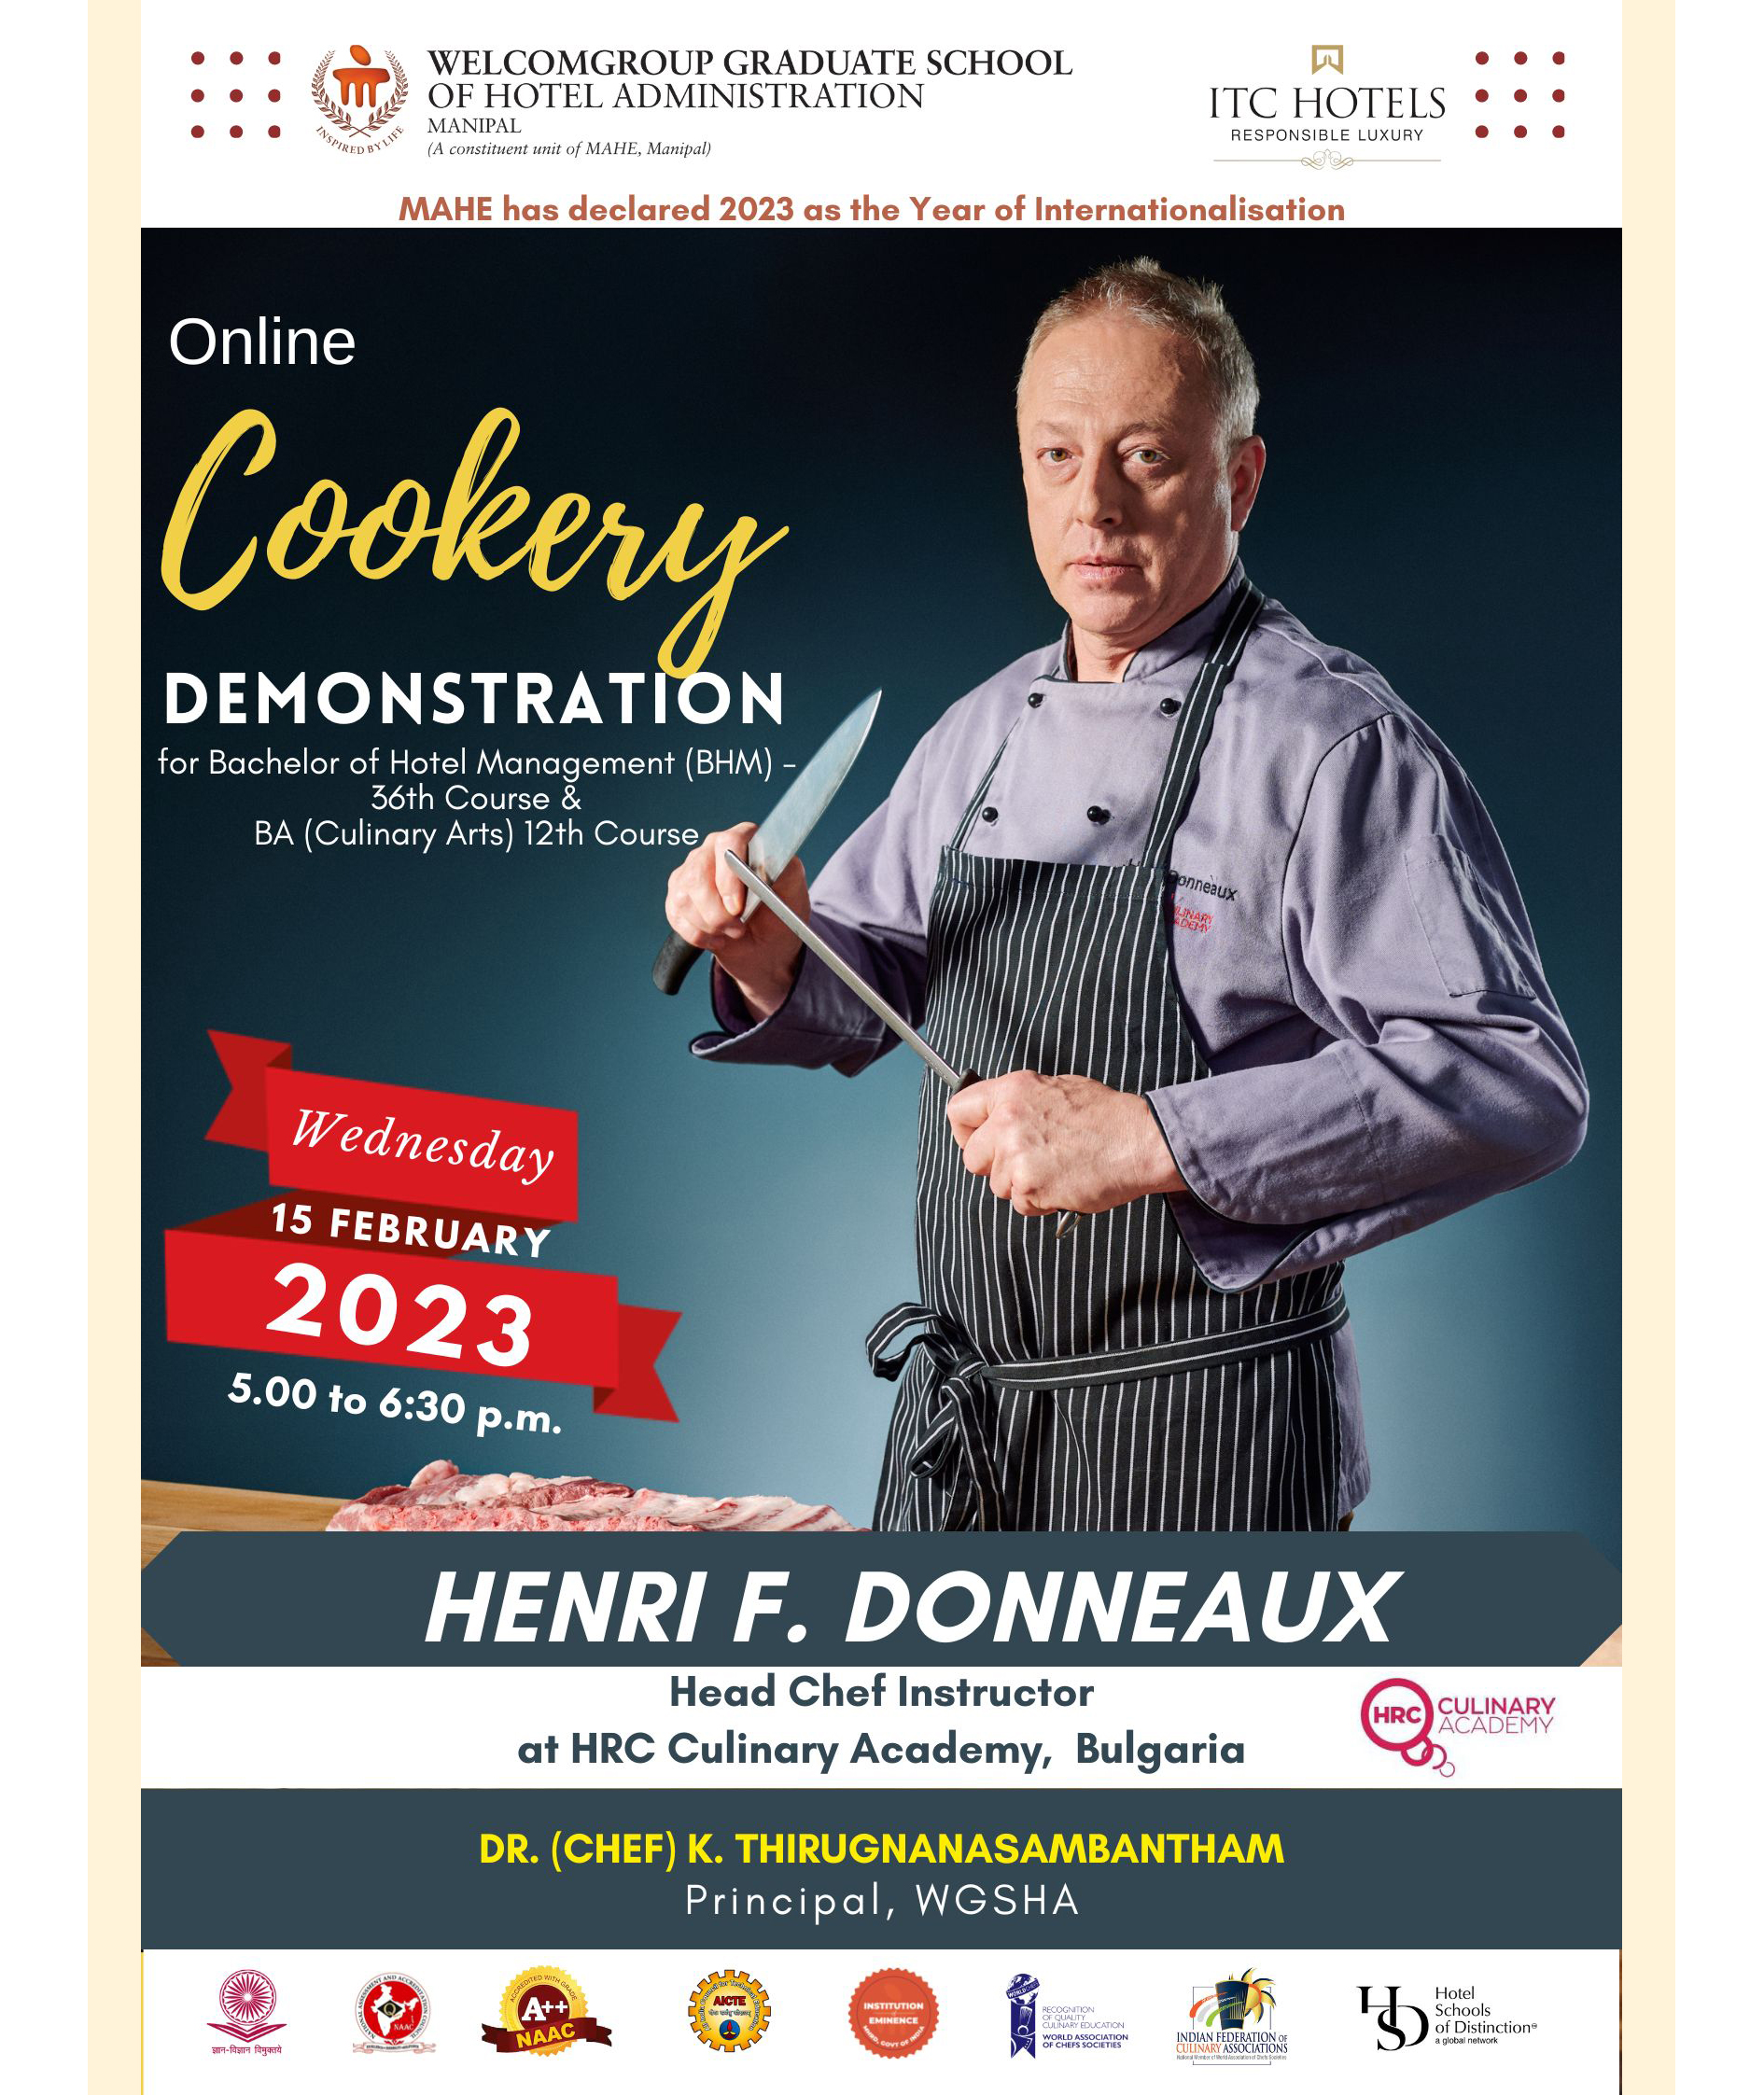 Cookery demo by Chef Henri Donneaux from HRC Culinary Academy Bulgaria